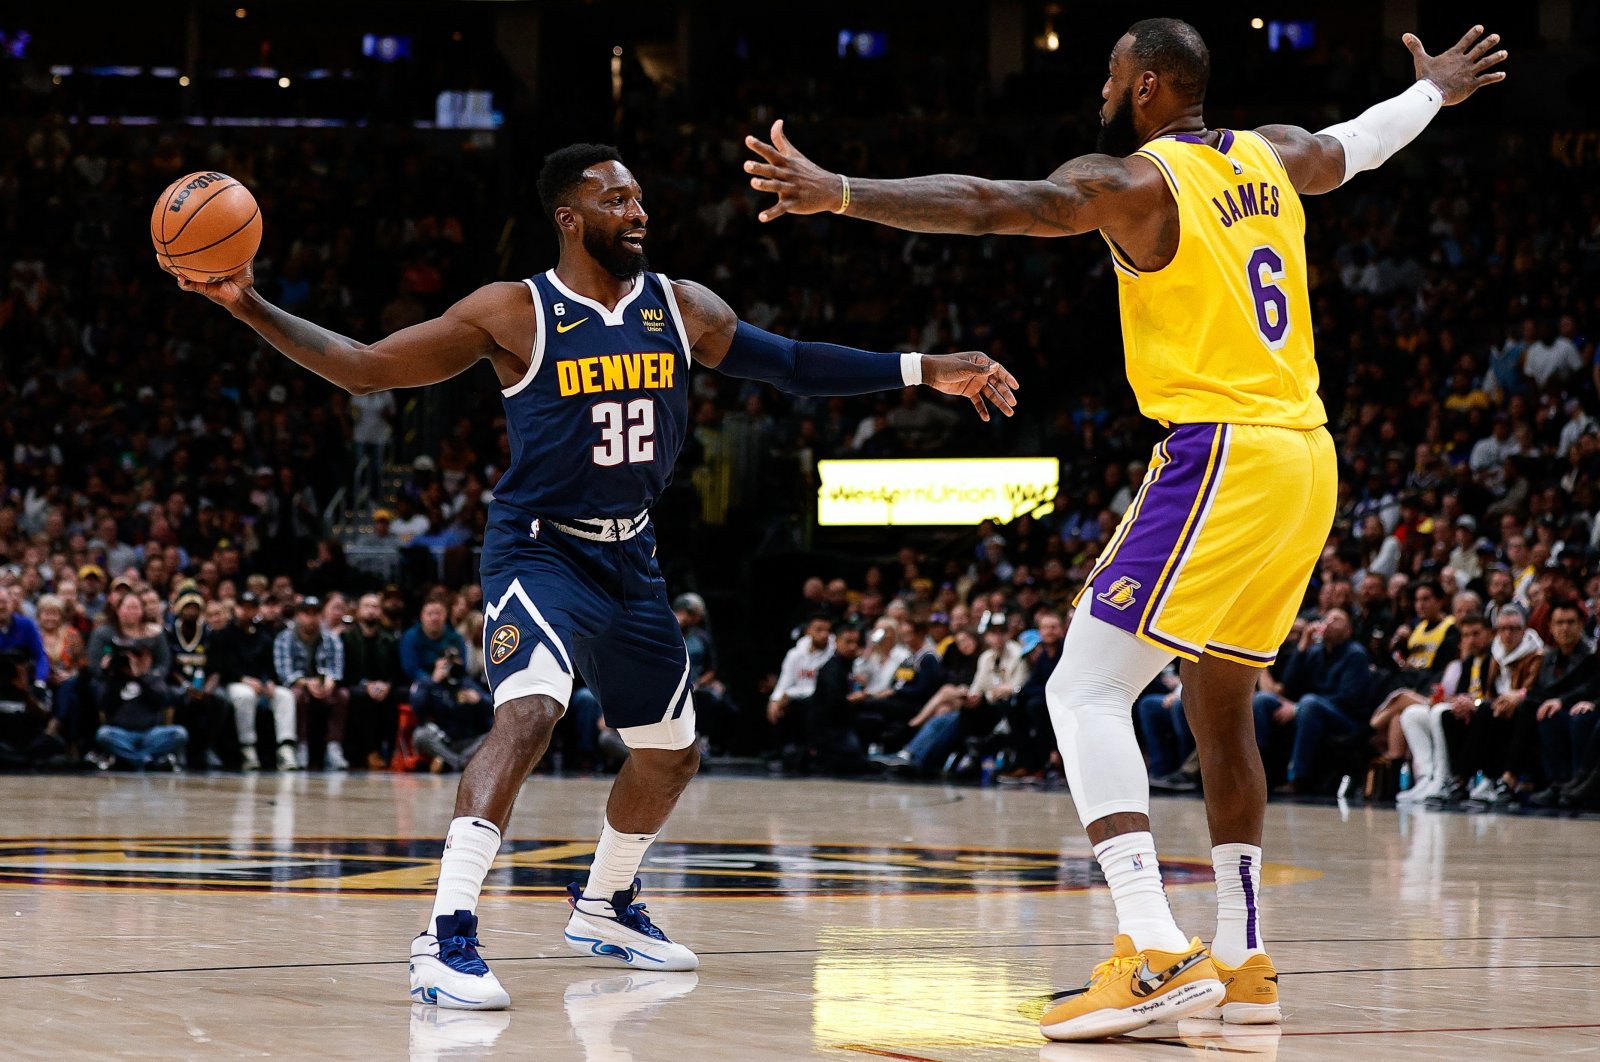 Denver Nuggets forward Jeff Green (32) controls the ball as Los Angeles Lakers forward LeBron James (6) guards in the fourth quarter at Ball Arena, Denver, Colorado, U.S., Oct. 26, 2022. (Reuters Photo)